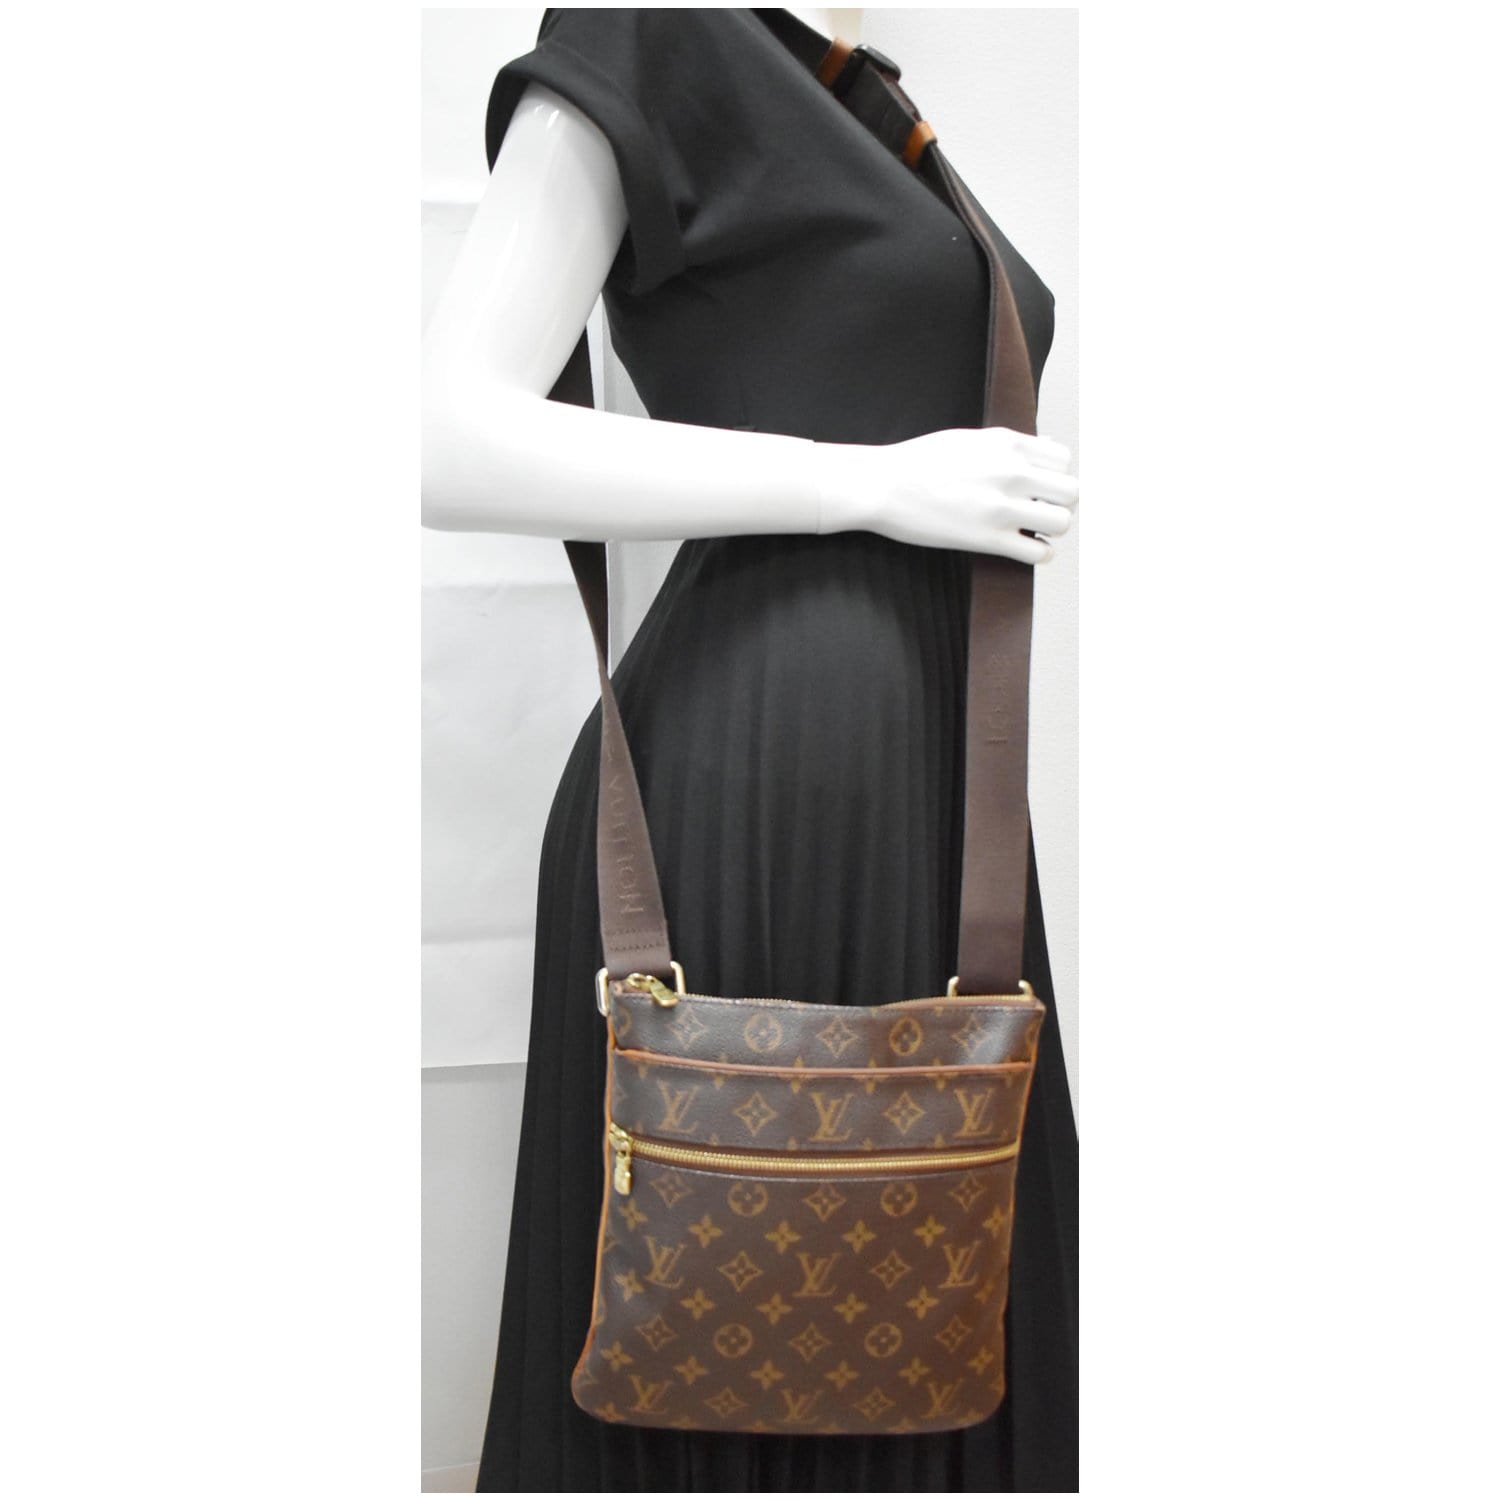 Louis Vuitton, a monogram Valmy MM messenger bag, crafted from the maker's  monogram coated canvas ex